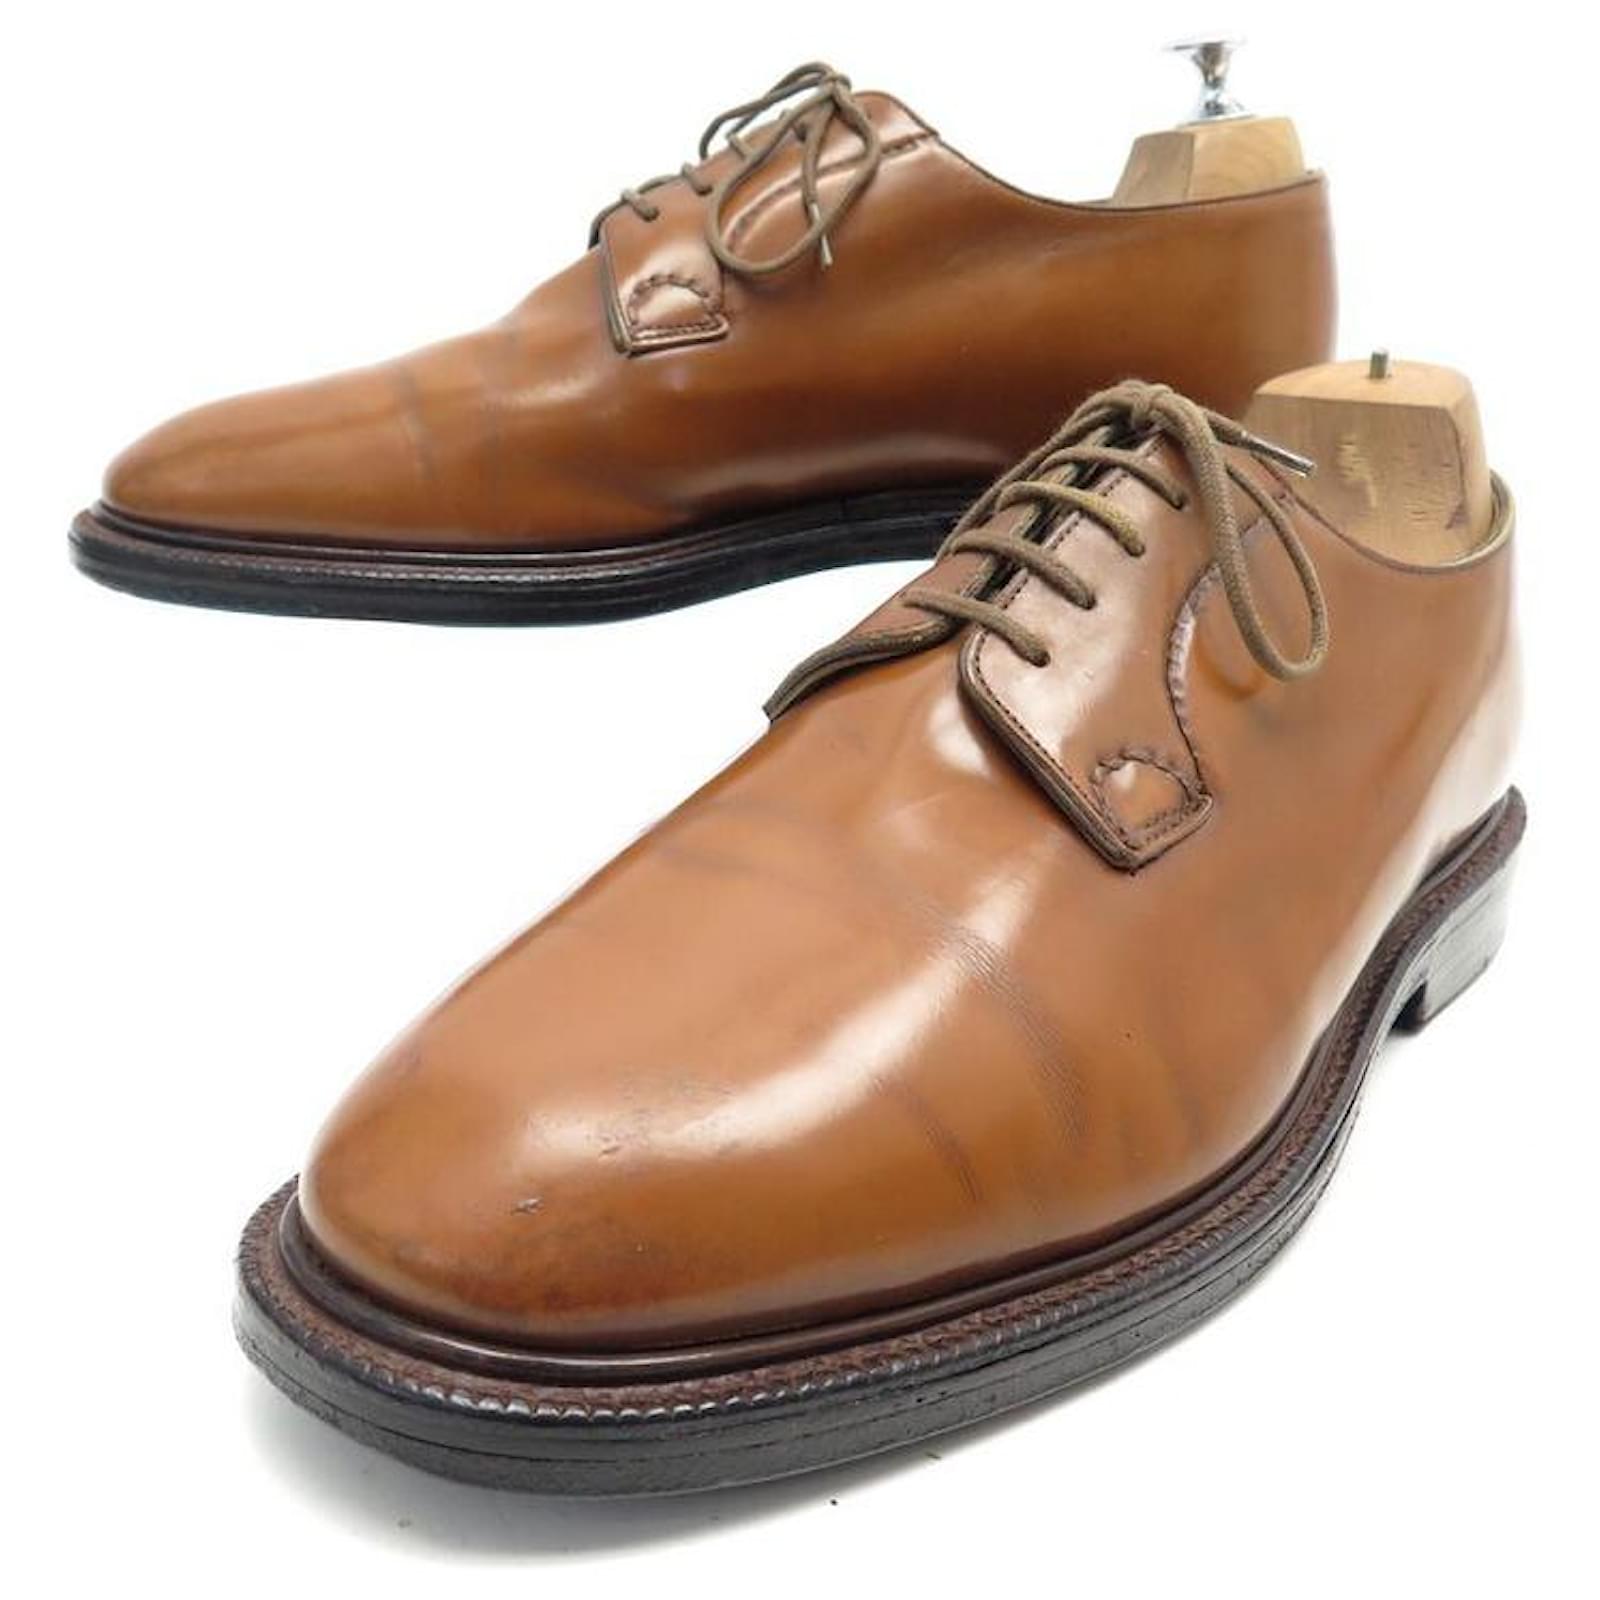 CHURCH'S DERBY SHANNON SHOES 7.5F 41.5 BROWN LEATHER SHOES ref